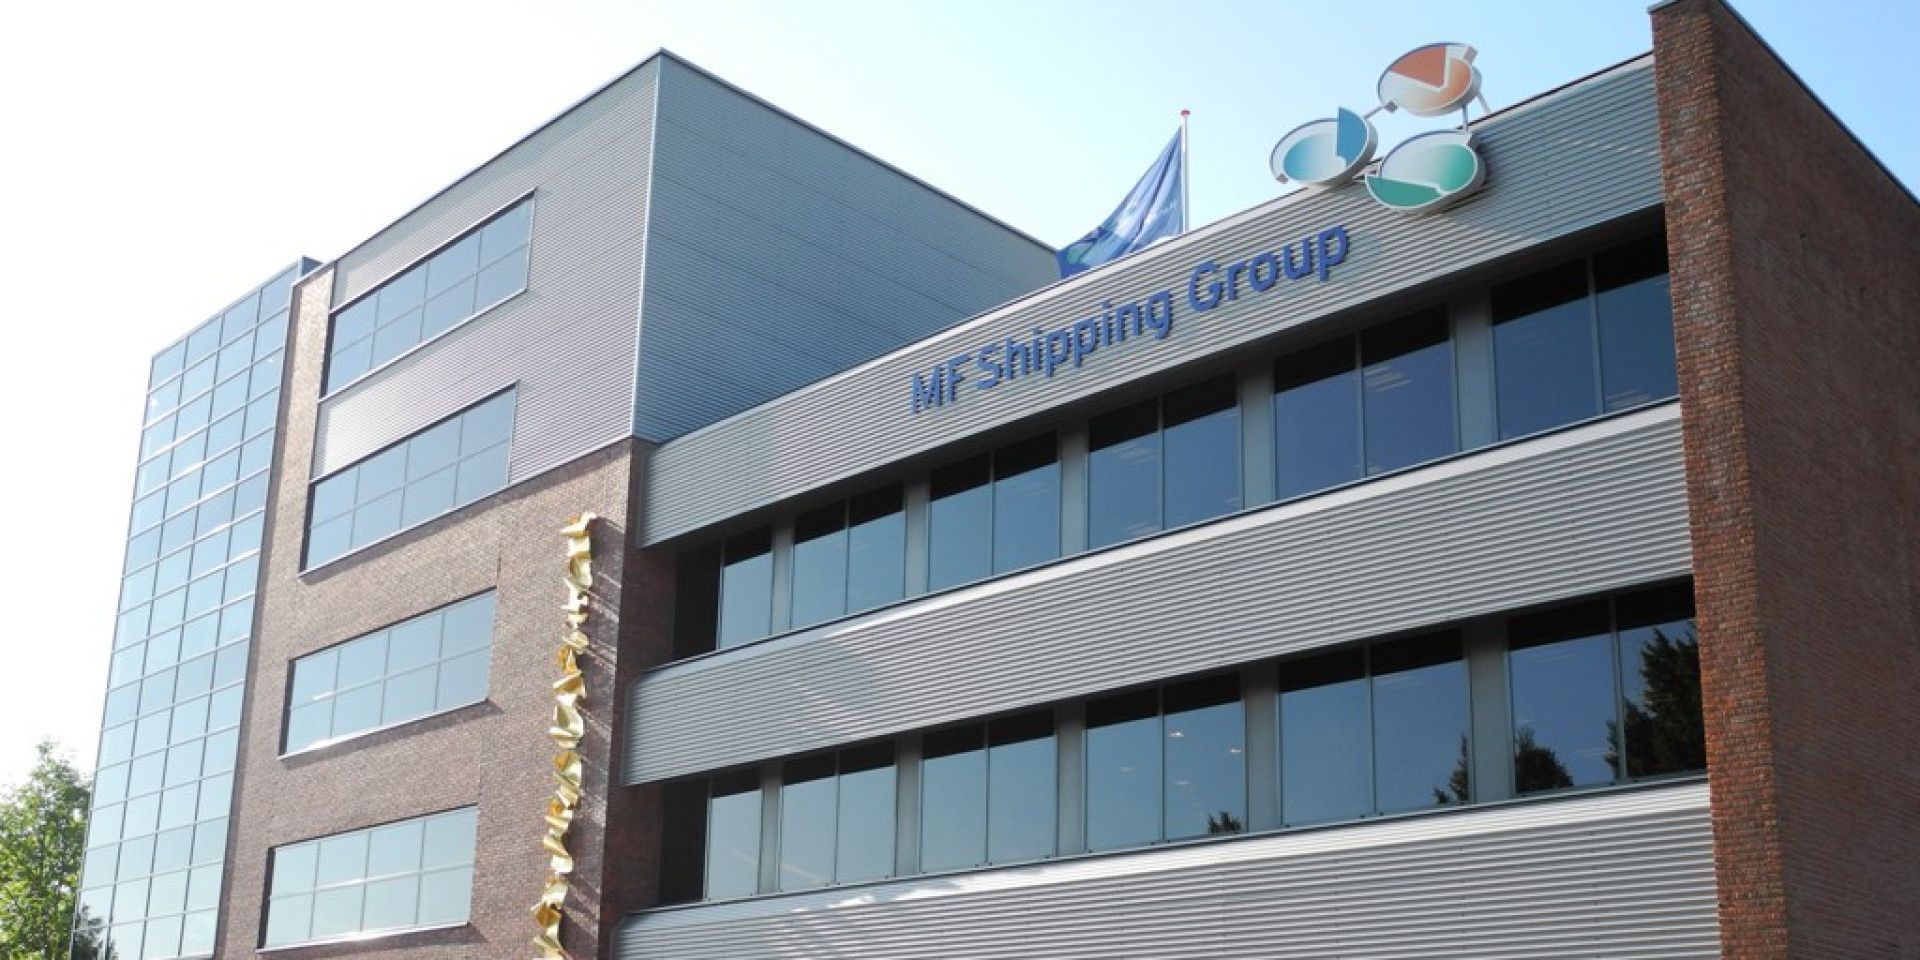 MF Shipping Group in Farmsum